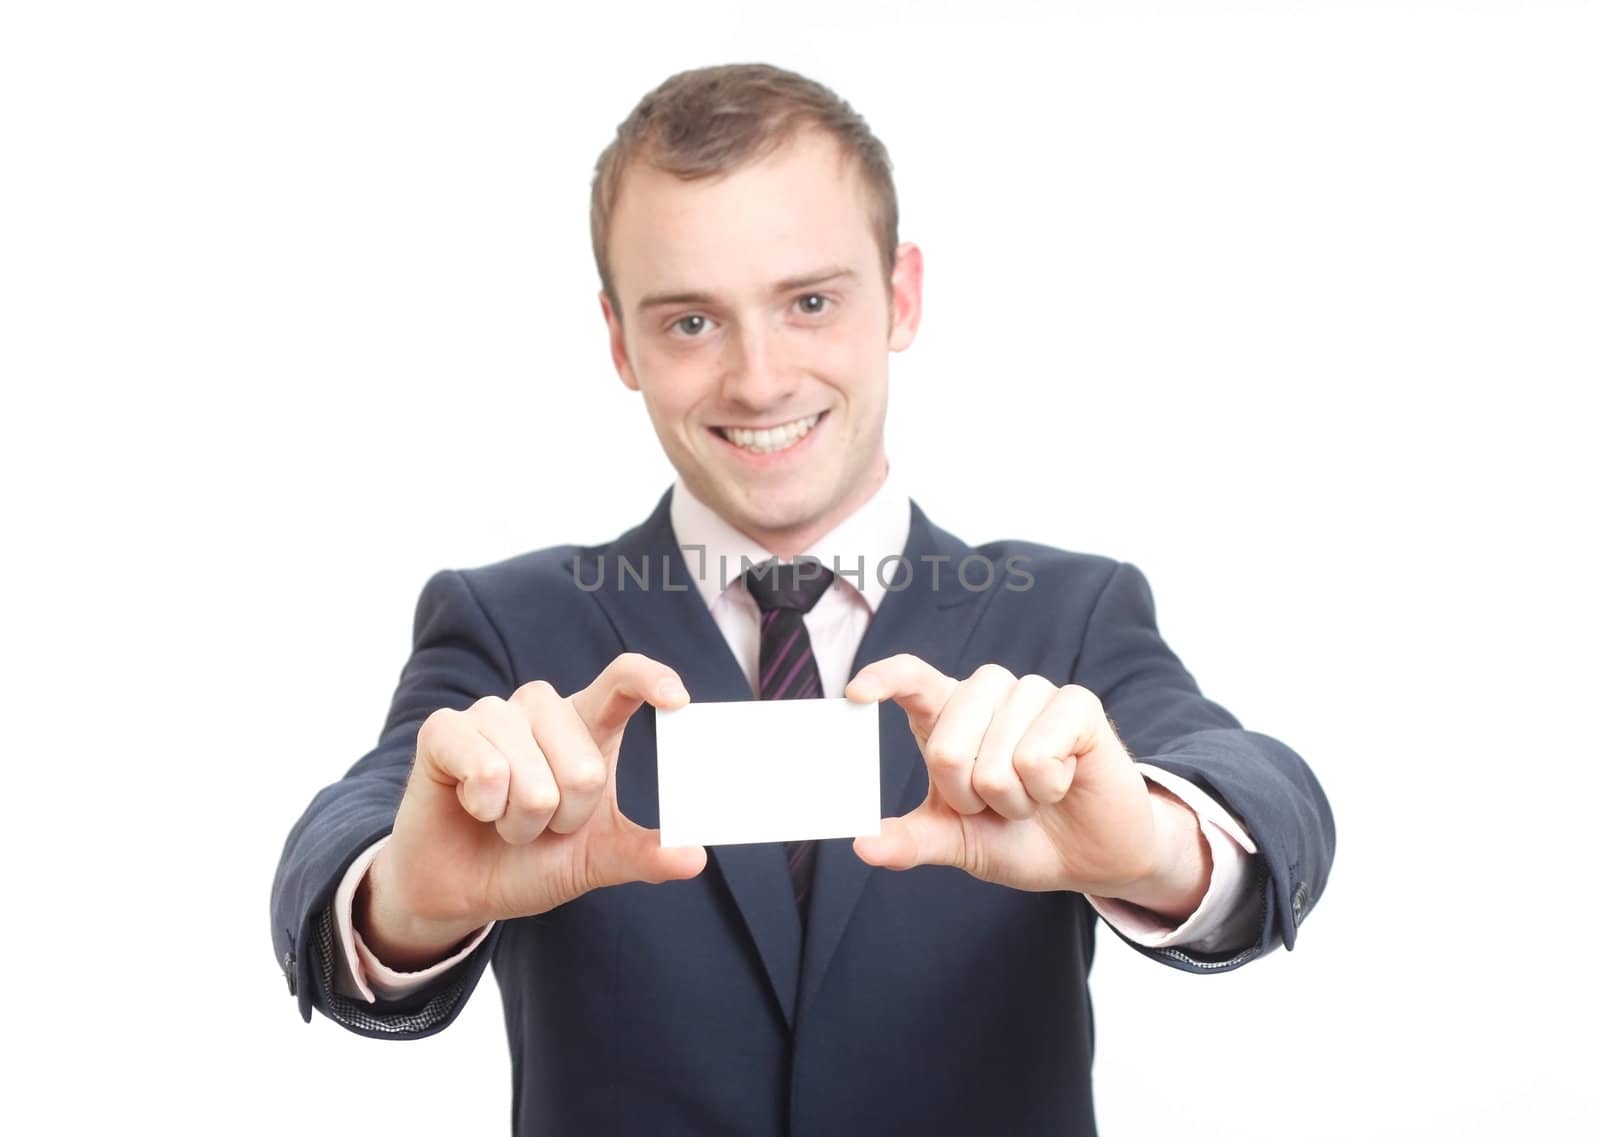 A business man presenting his business card